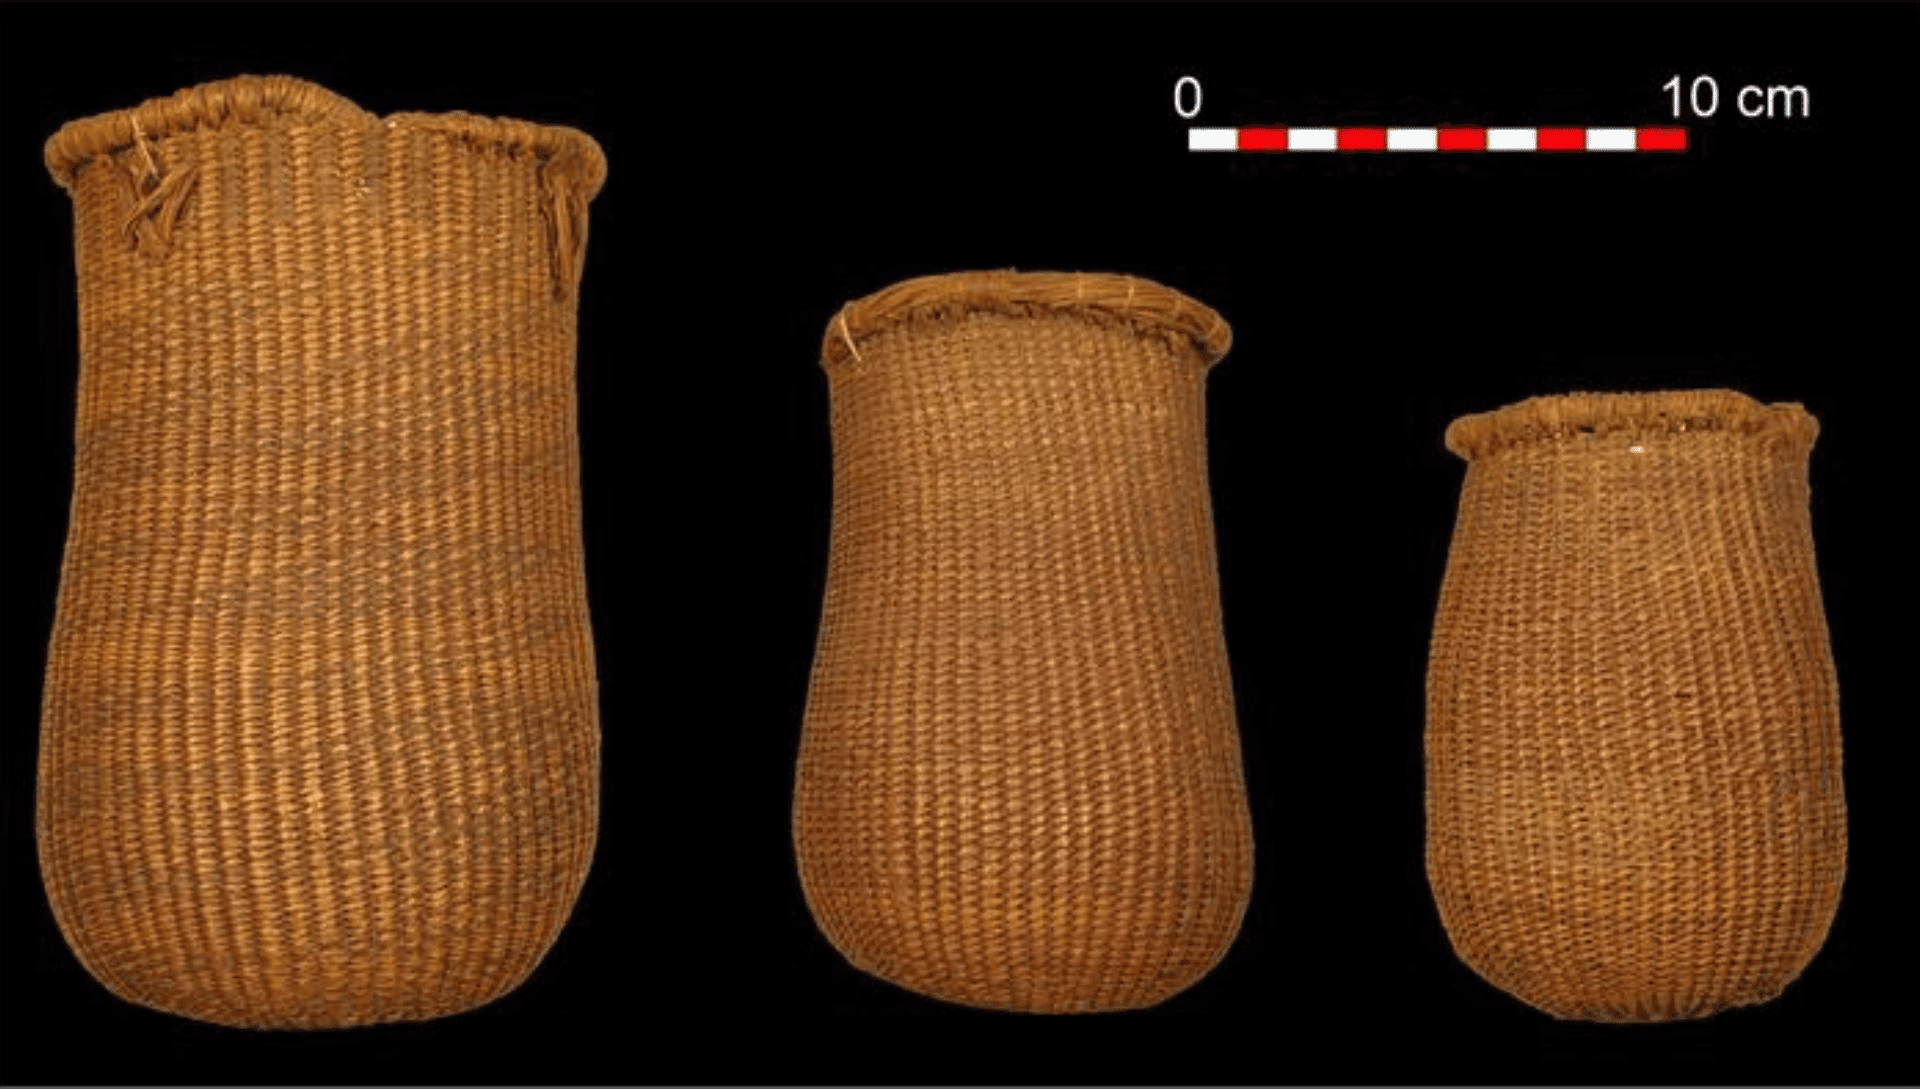 Oldest Mesolithic baskets in southern Europe, 9,500 years old MUTERMUR Project